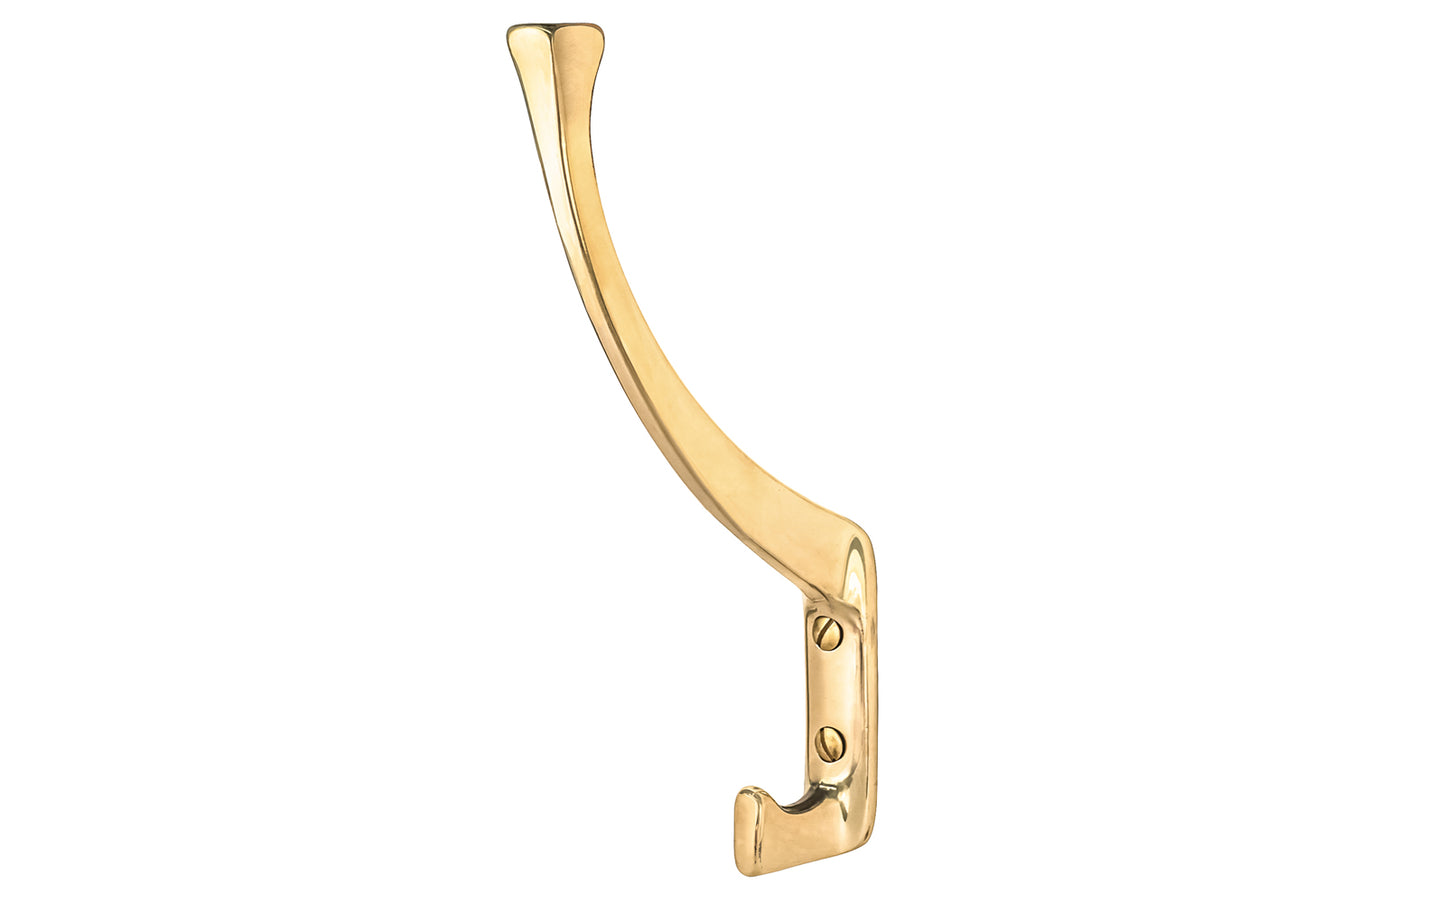 Vintage-style unlacquered brass hall tree hook. Great for kitchens, bathrooms, hallways, hall trees, furniture, bedrooms. Made of solid brass material, the hook is durable for clothing, towels, bags. Non-lacquered brass (will patina over time). Timeless classic hook. Mission Style / Arts & Crafts, Craftsman Style.